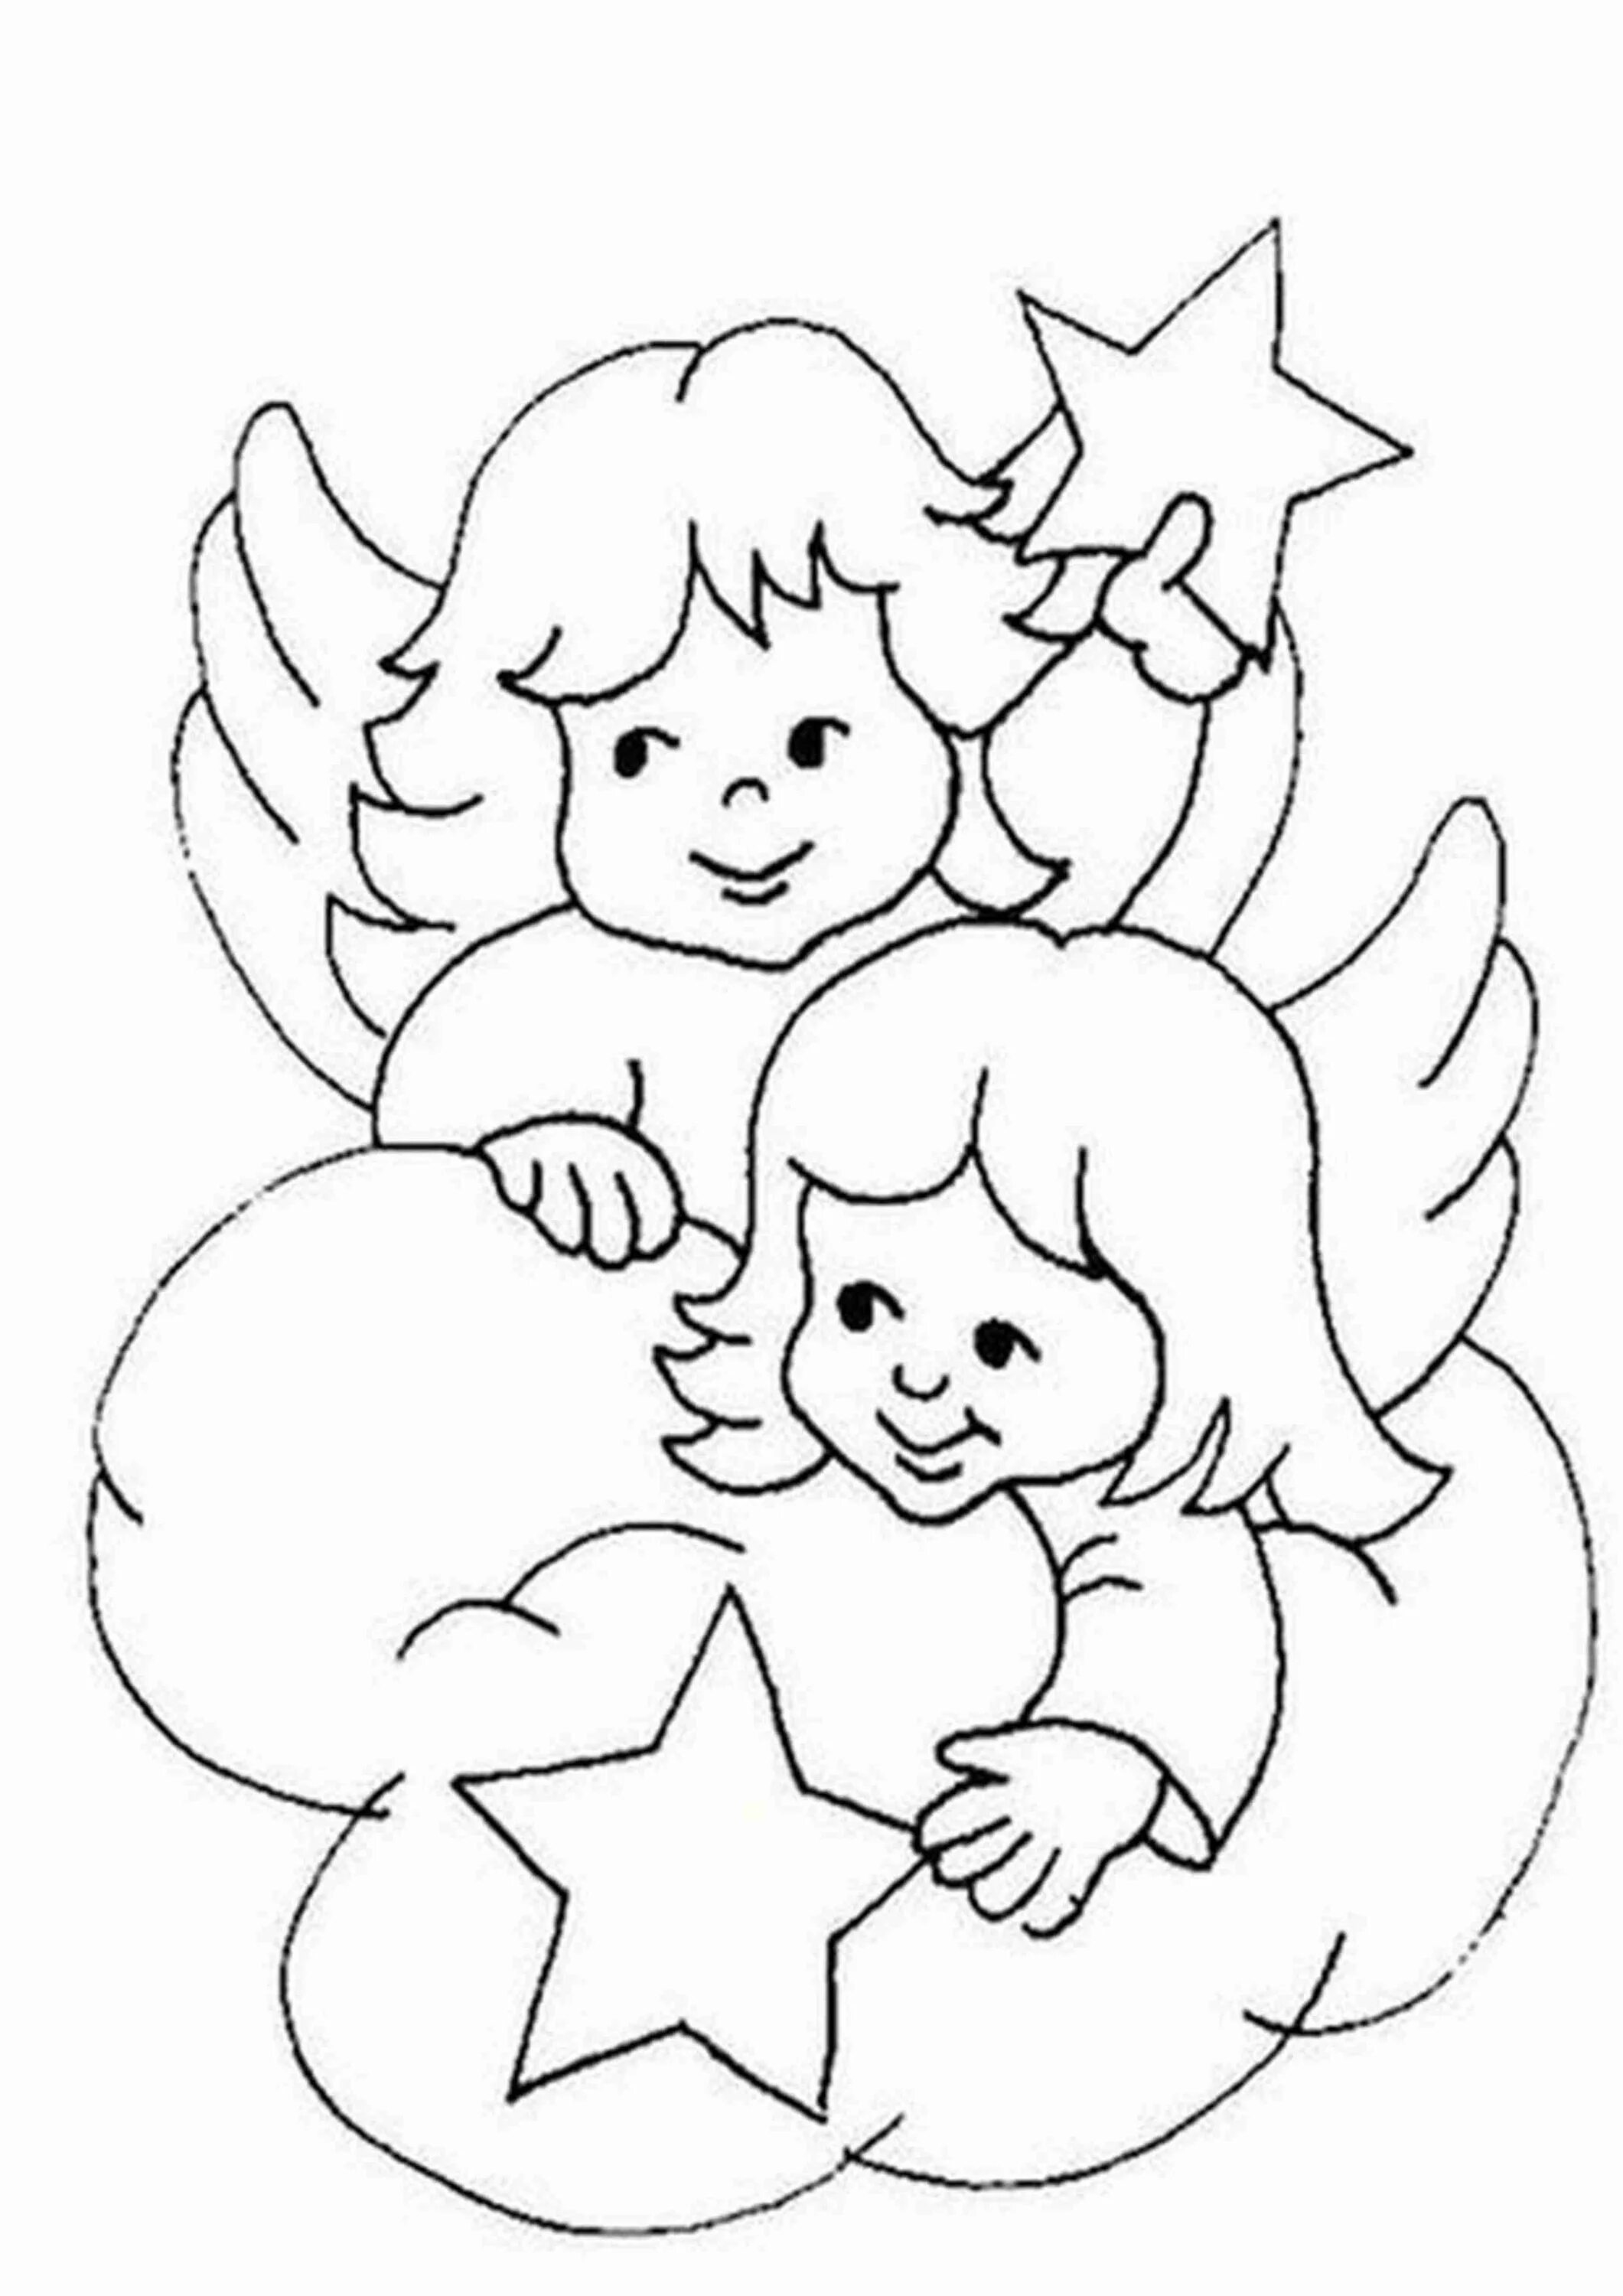 Cute Christmas angel coloring page